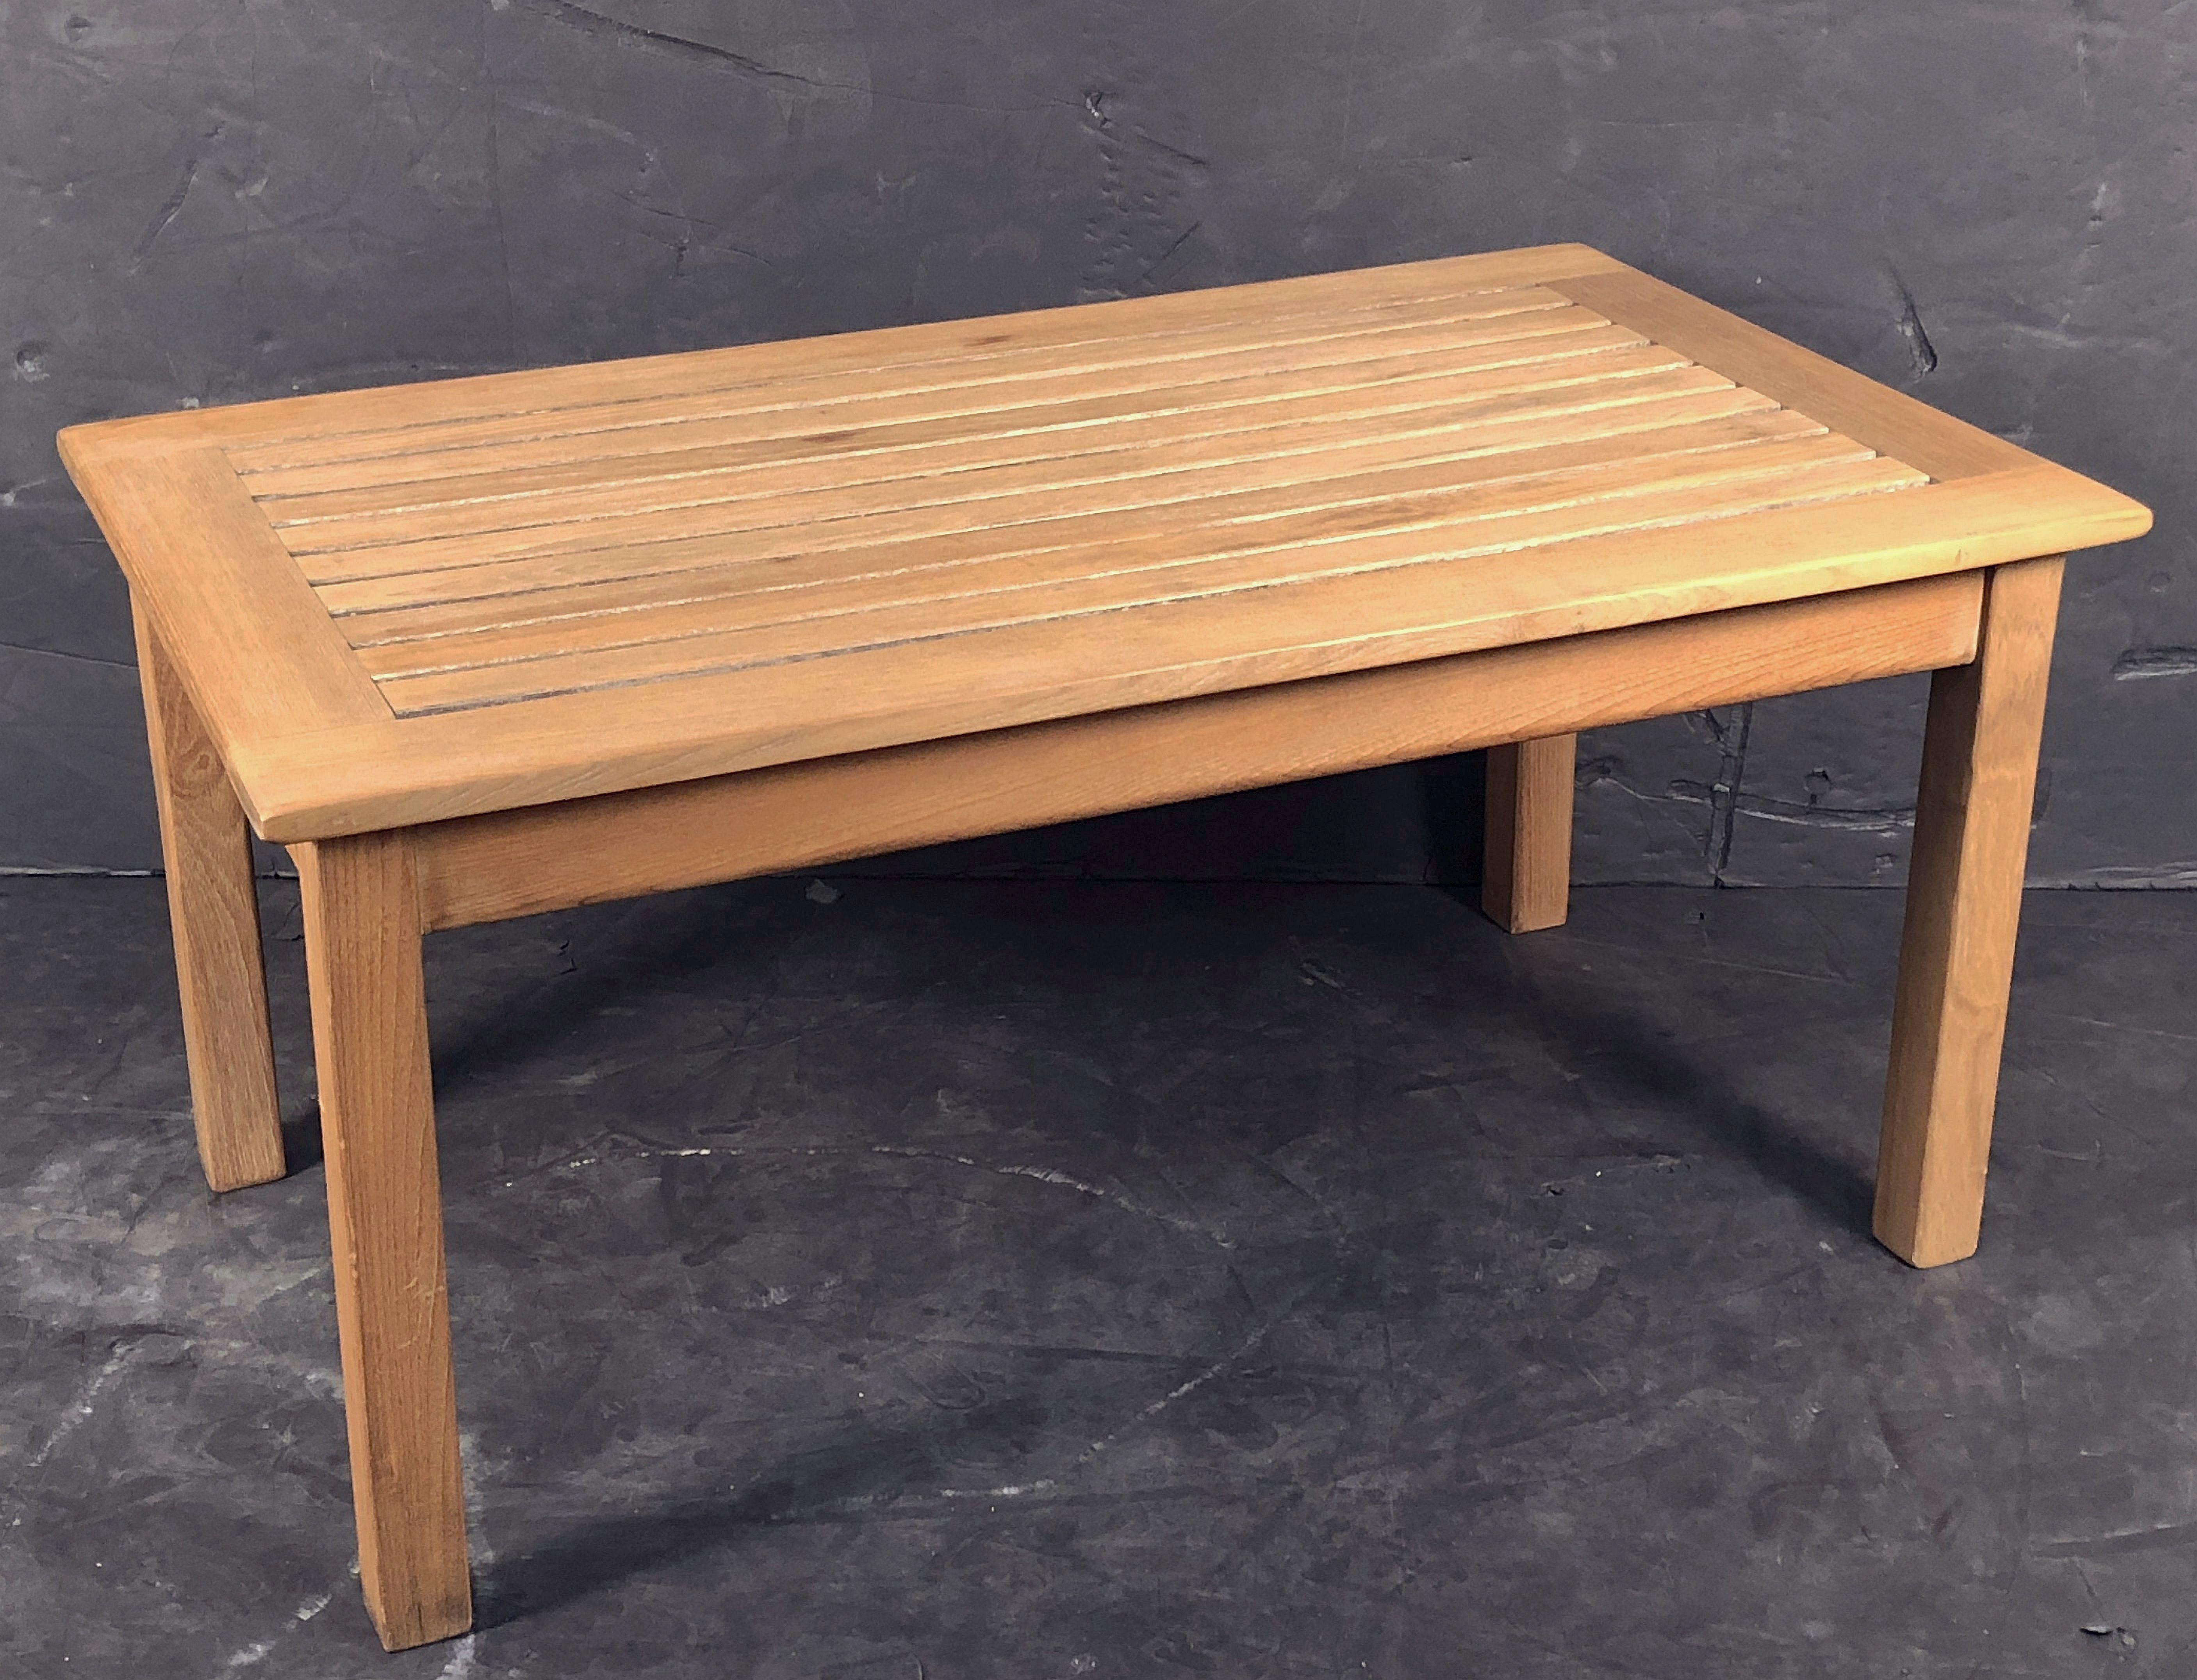 A fine English low or cocktail or coffee table of patinated teak for the garden or patio featuring a rectangular slatted top set upon a sturdy four-legged frame.